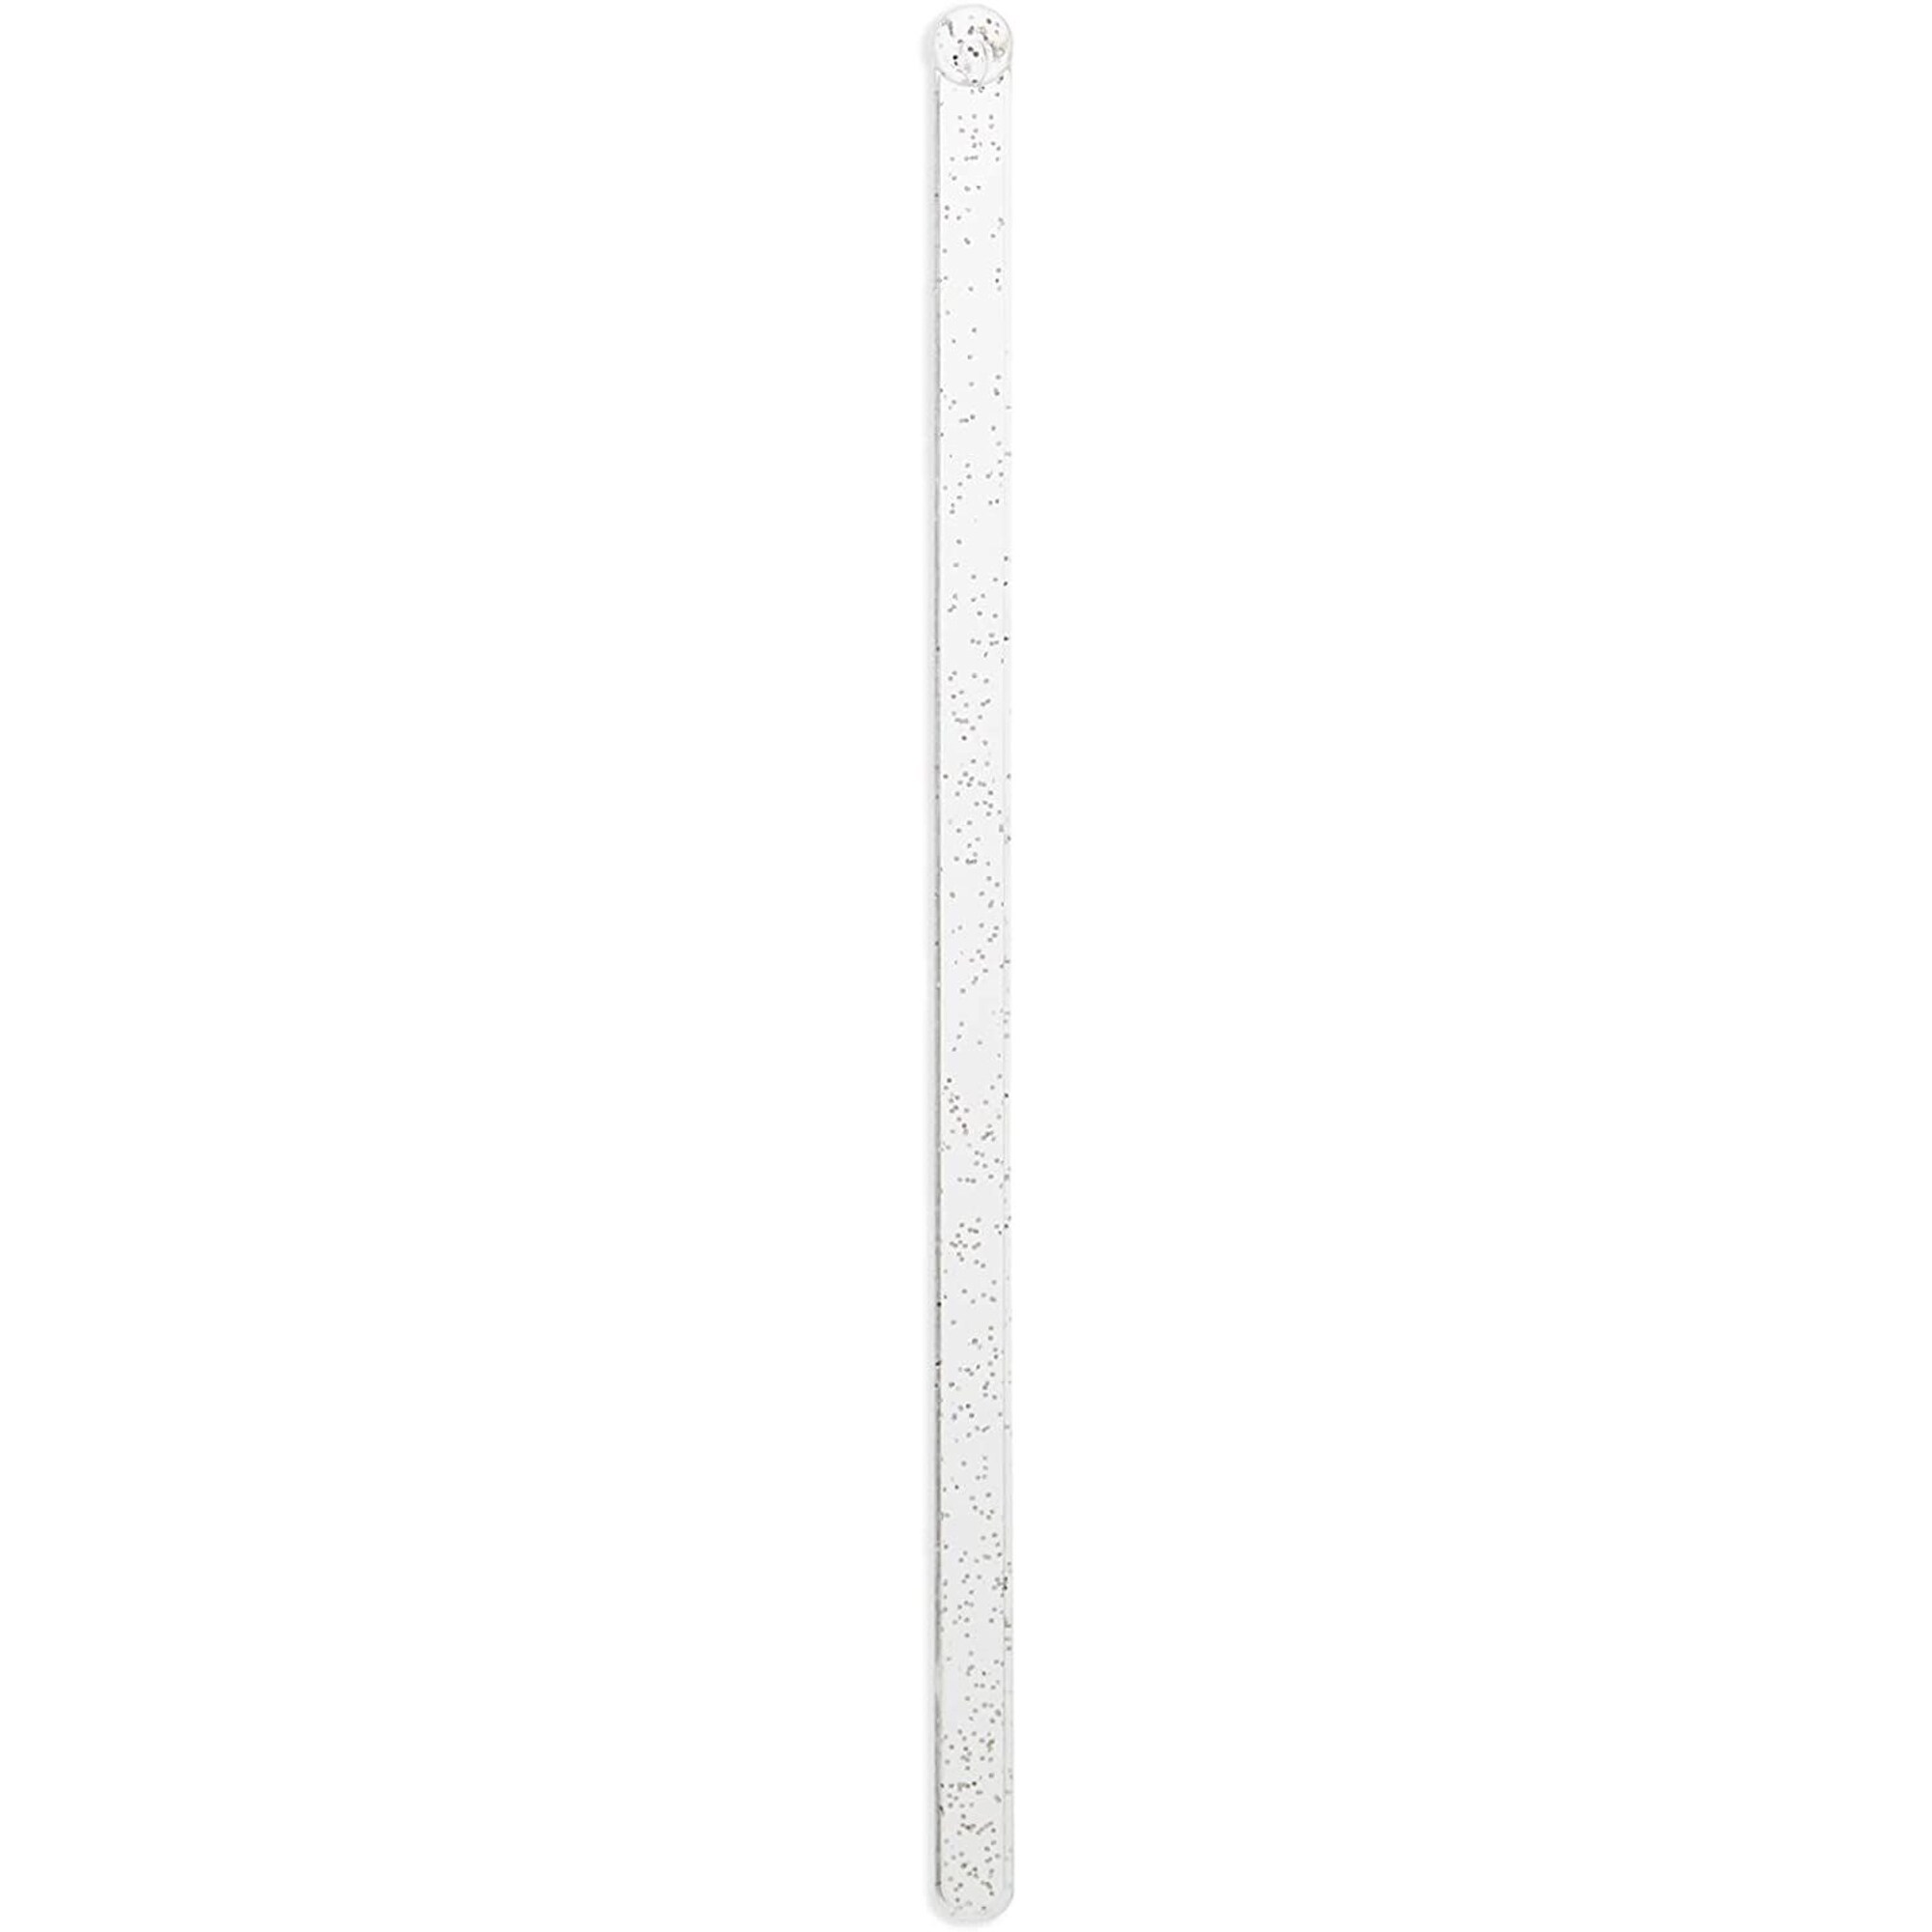 https://ak1.ostkcdn.com/images/products/is/images/direct/ce2b1053be2d8db3a7c6aed203f5848e63fbe2ef/Silver-Glitter-Swizzle-Sticks-for-Cocktails%2C-Clear-Drink-Stirrers-%287-In%2C-150-Pack%29.jpg